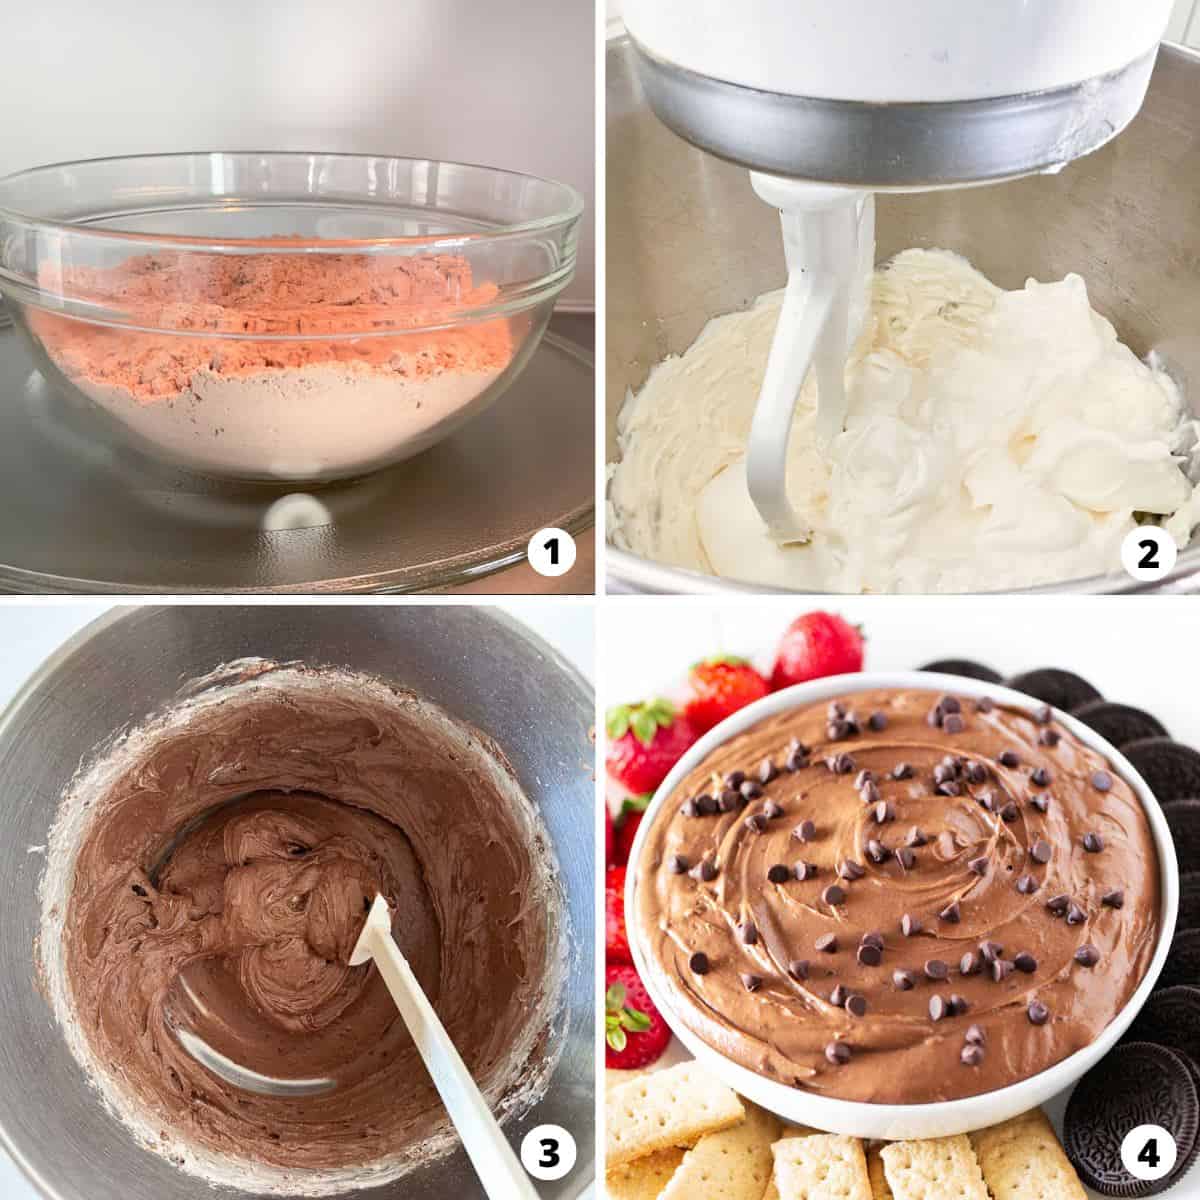 Showing how to make brownie batter dip.